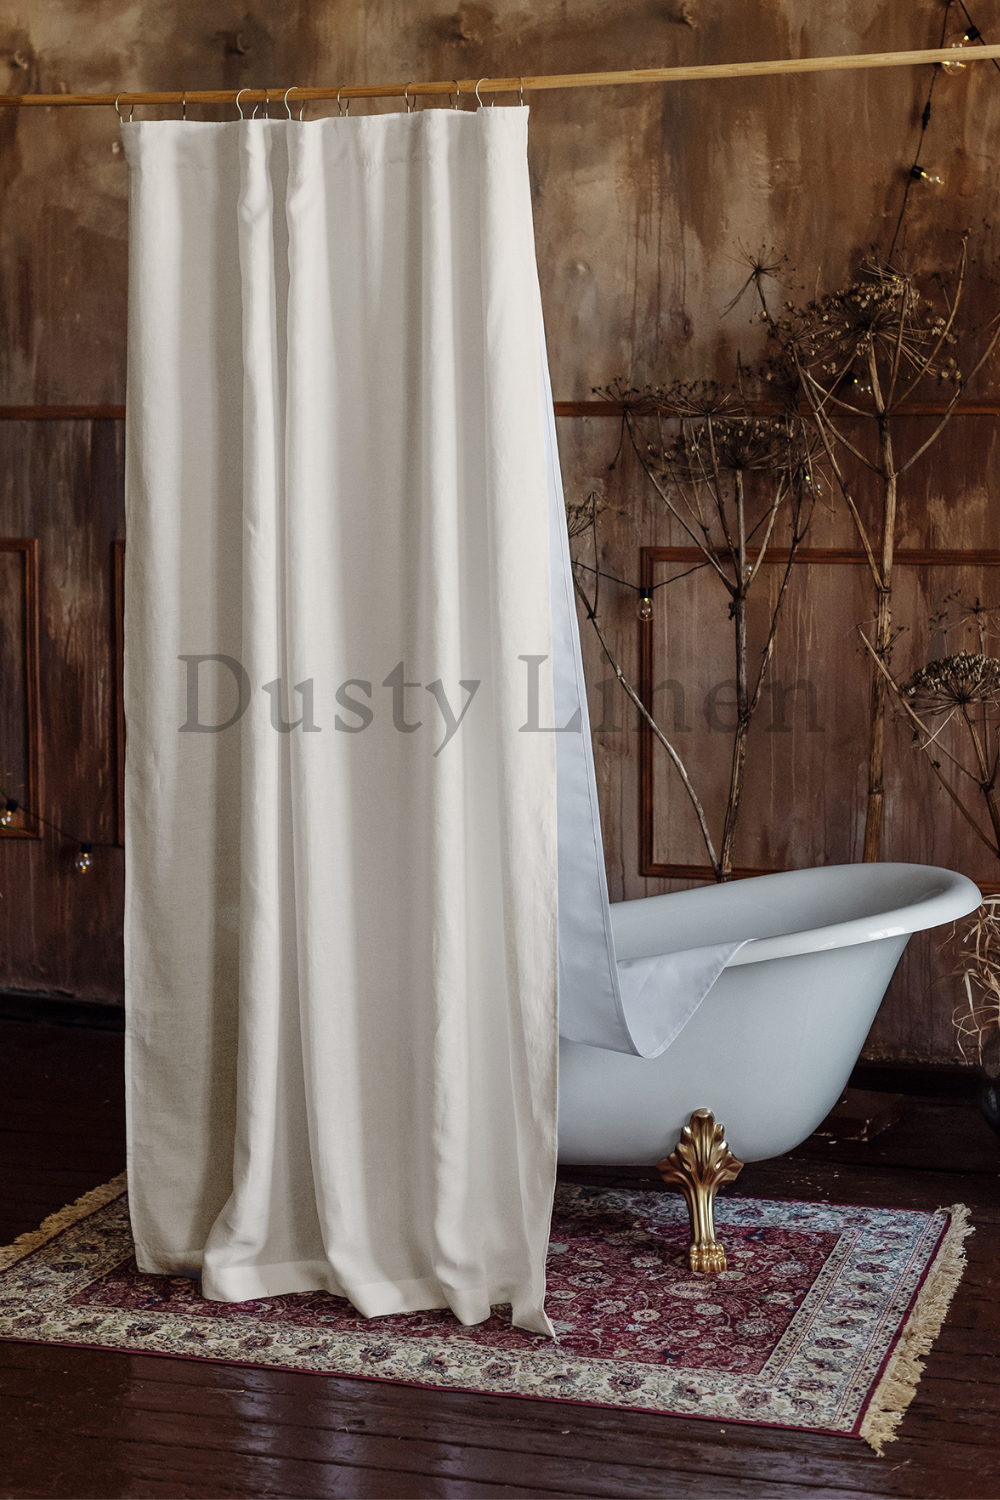 Dusty Linen made best selling Cream color linen bath curtain for rustic interior